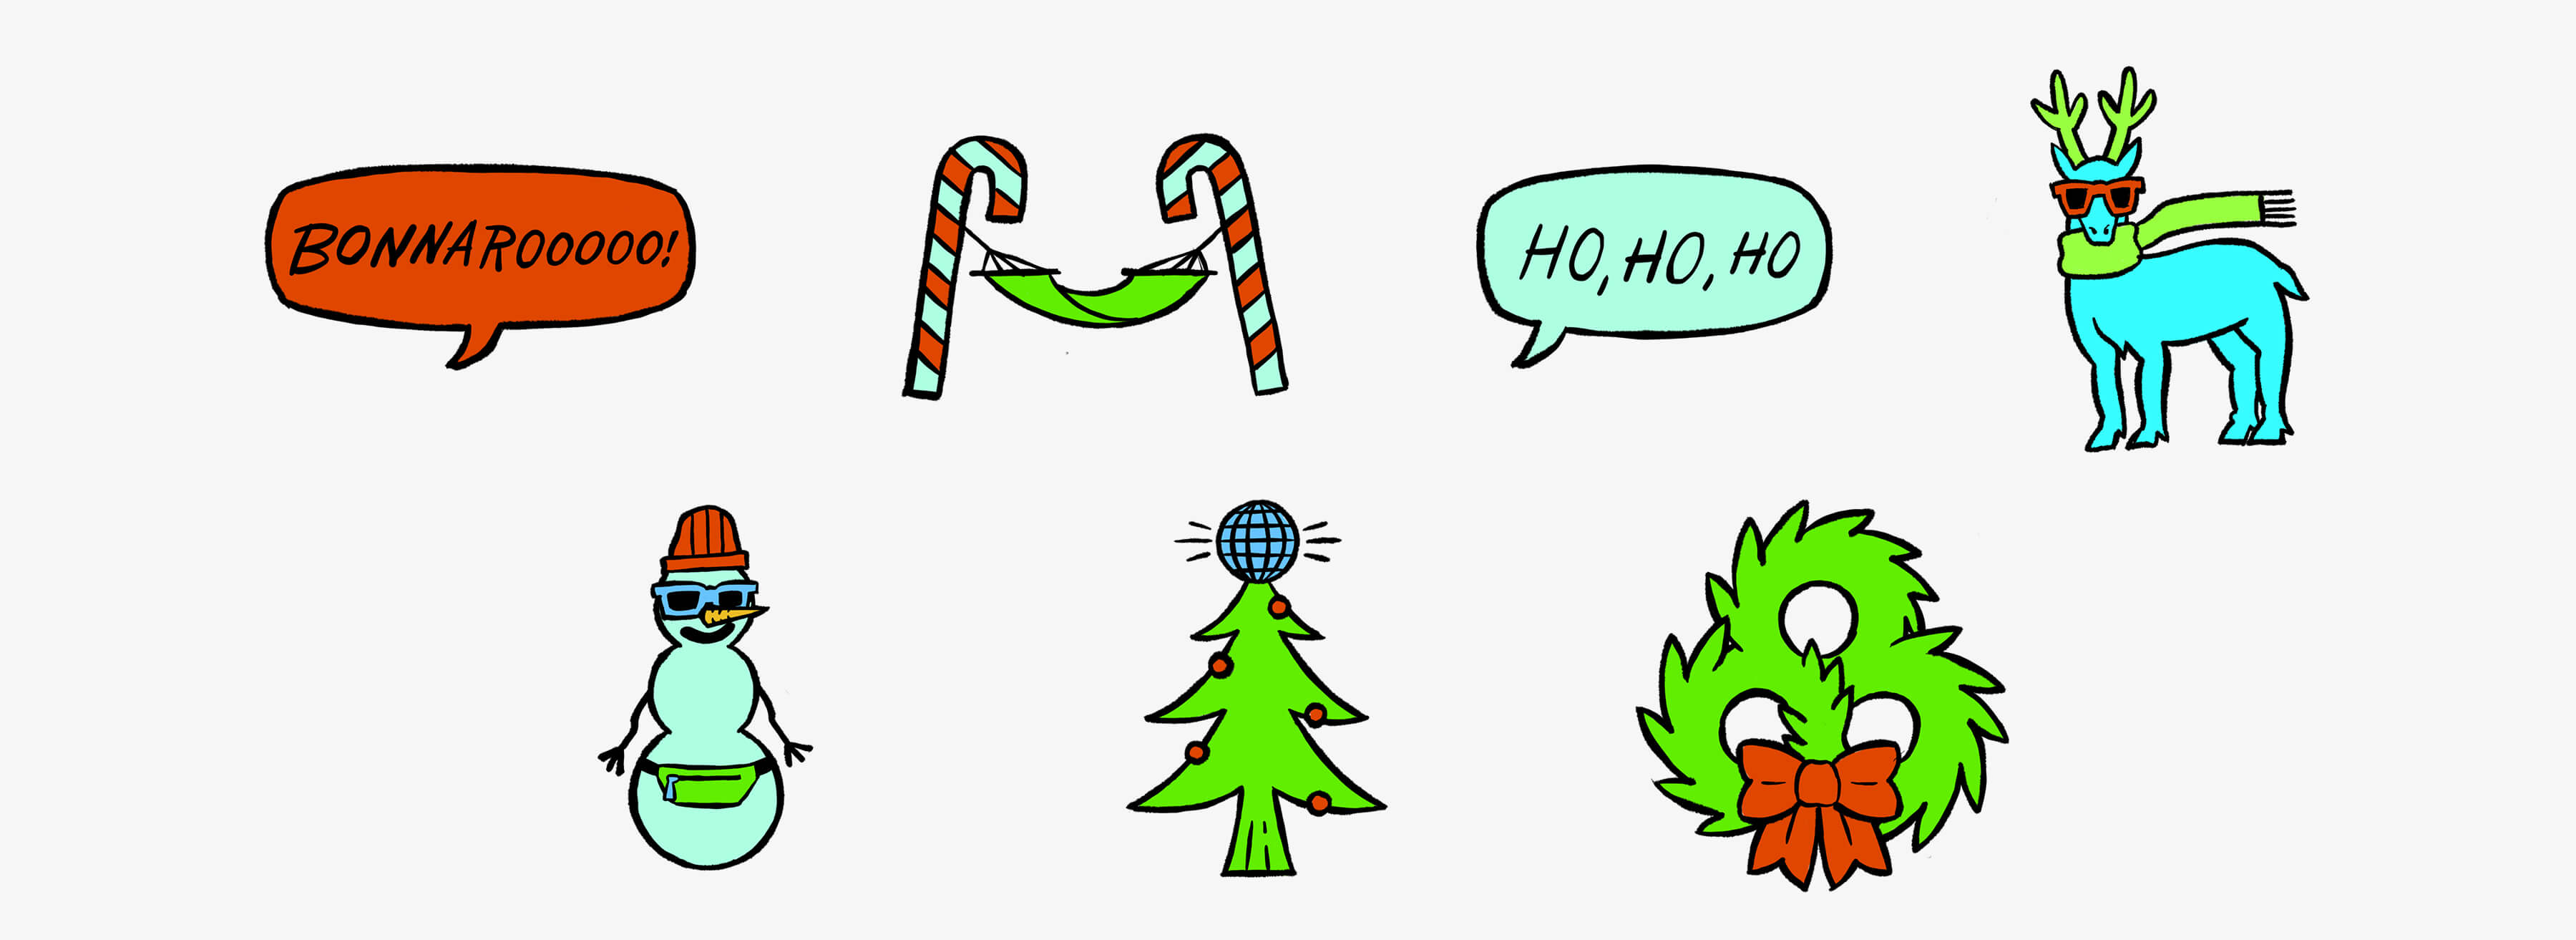 Illustrations developed for the Bonnaroo Holiday Card featuring speech bubbles, candy canes with a hammock, a child snowman and reindeer, a disco holiday tree, and festive holiday wreath.